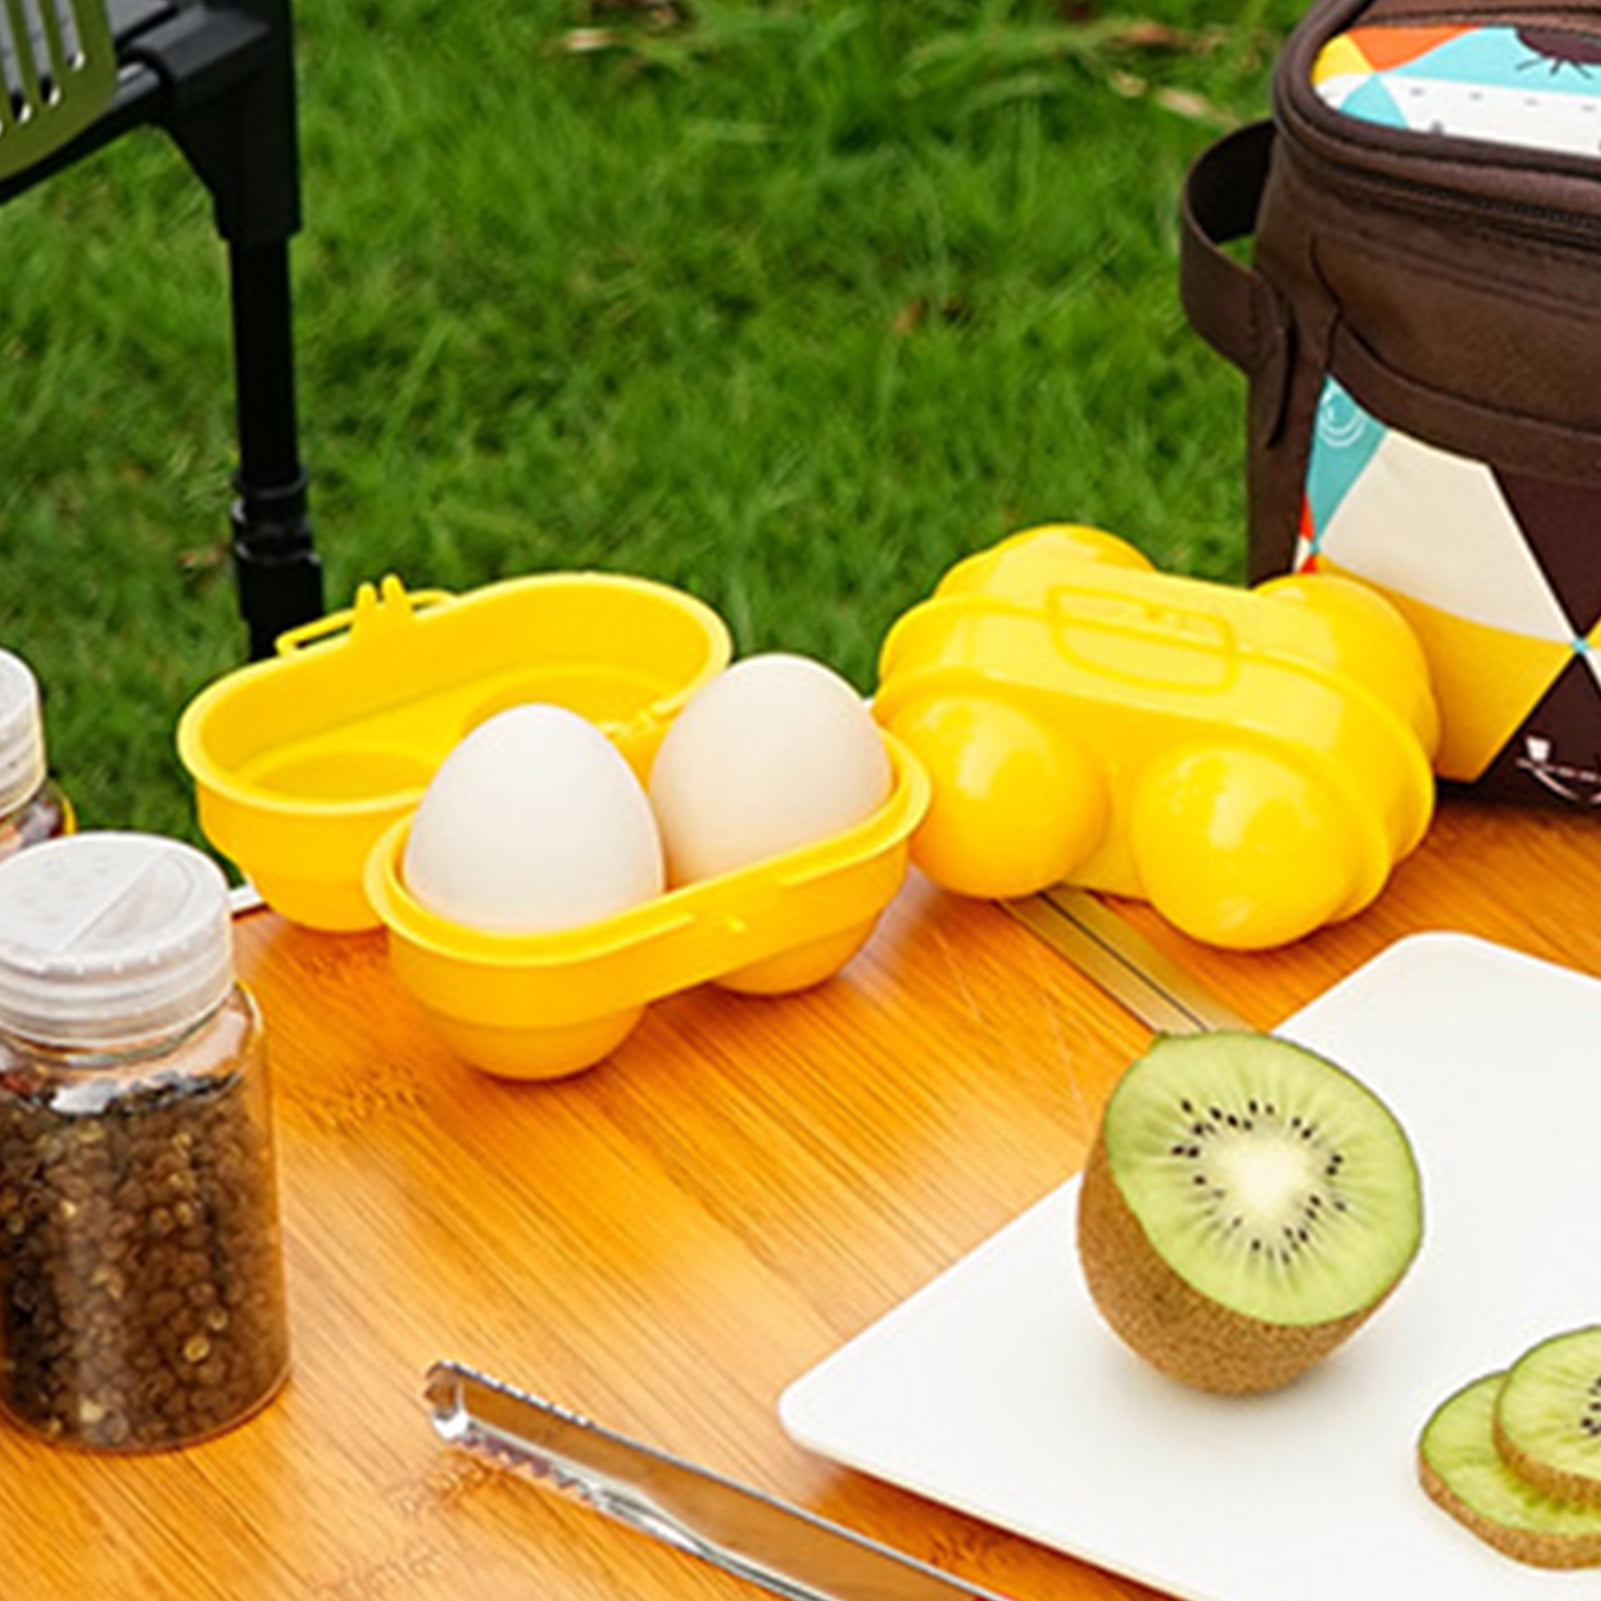 1 PC Portable Easter Matching Egg Carrier Container 4 Eggs Slot Tray Holder Shockproof Box Storage Case for Outdoor Camping 